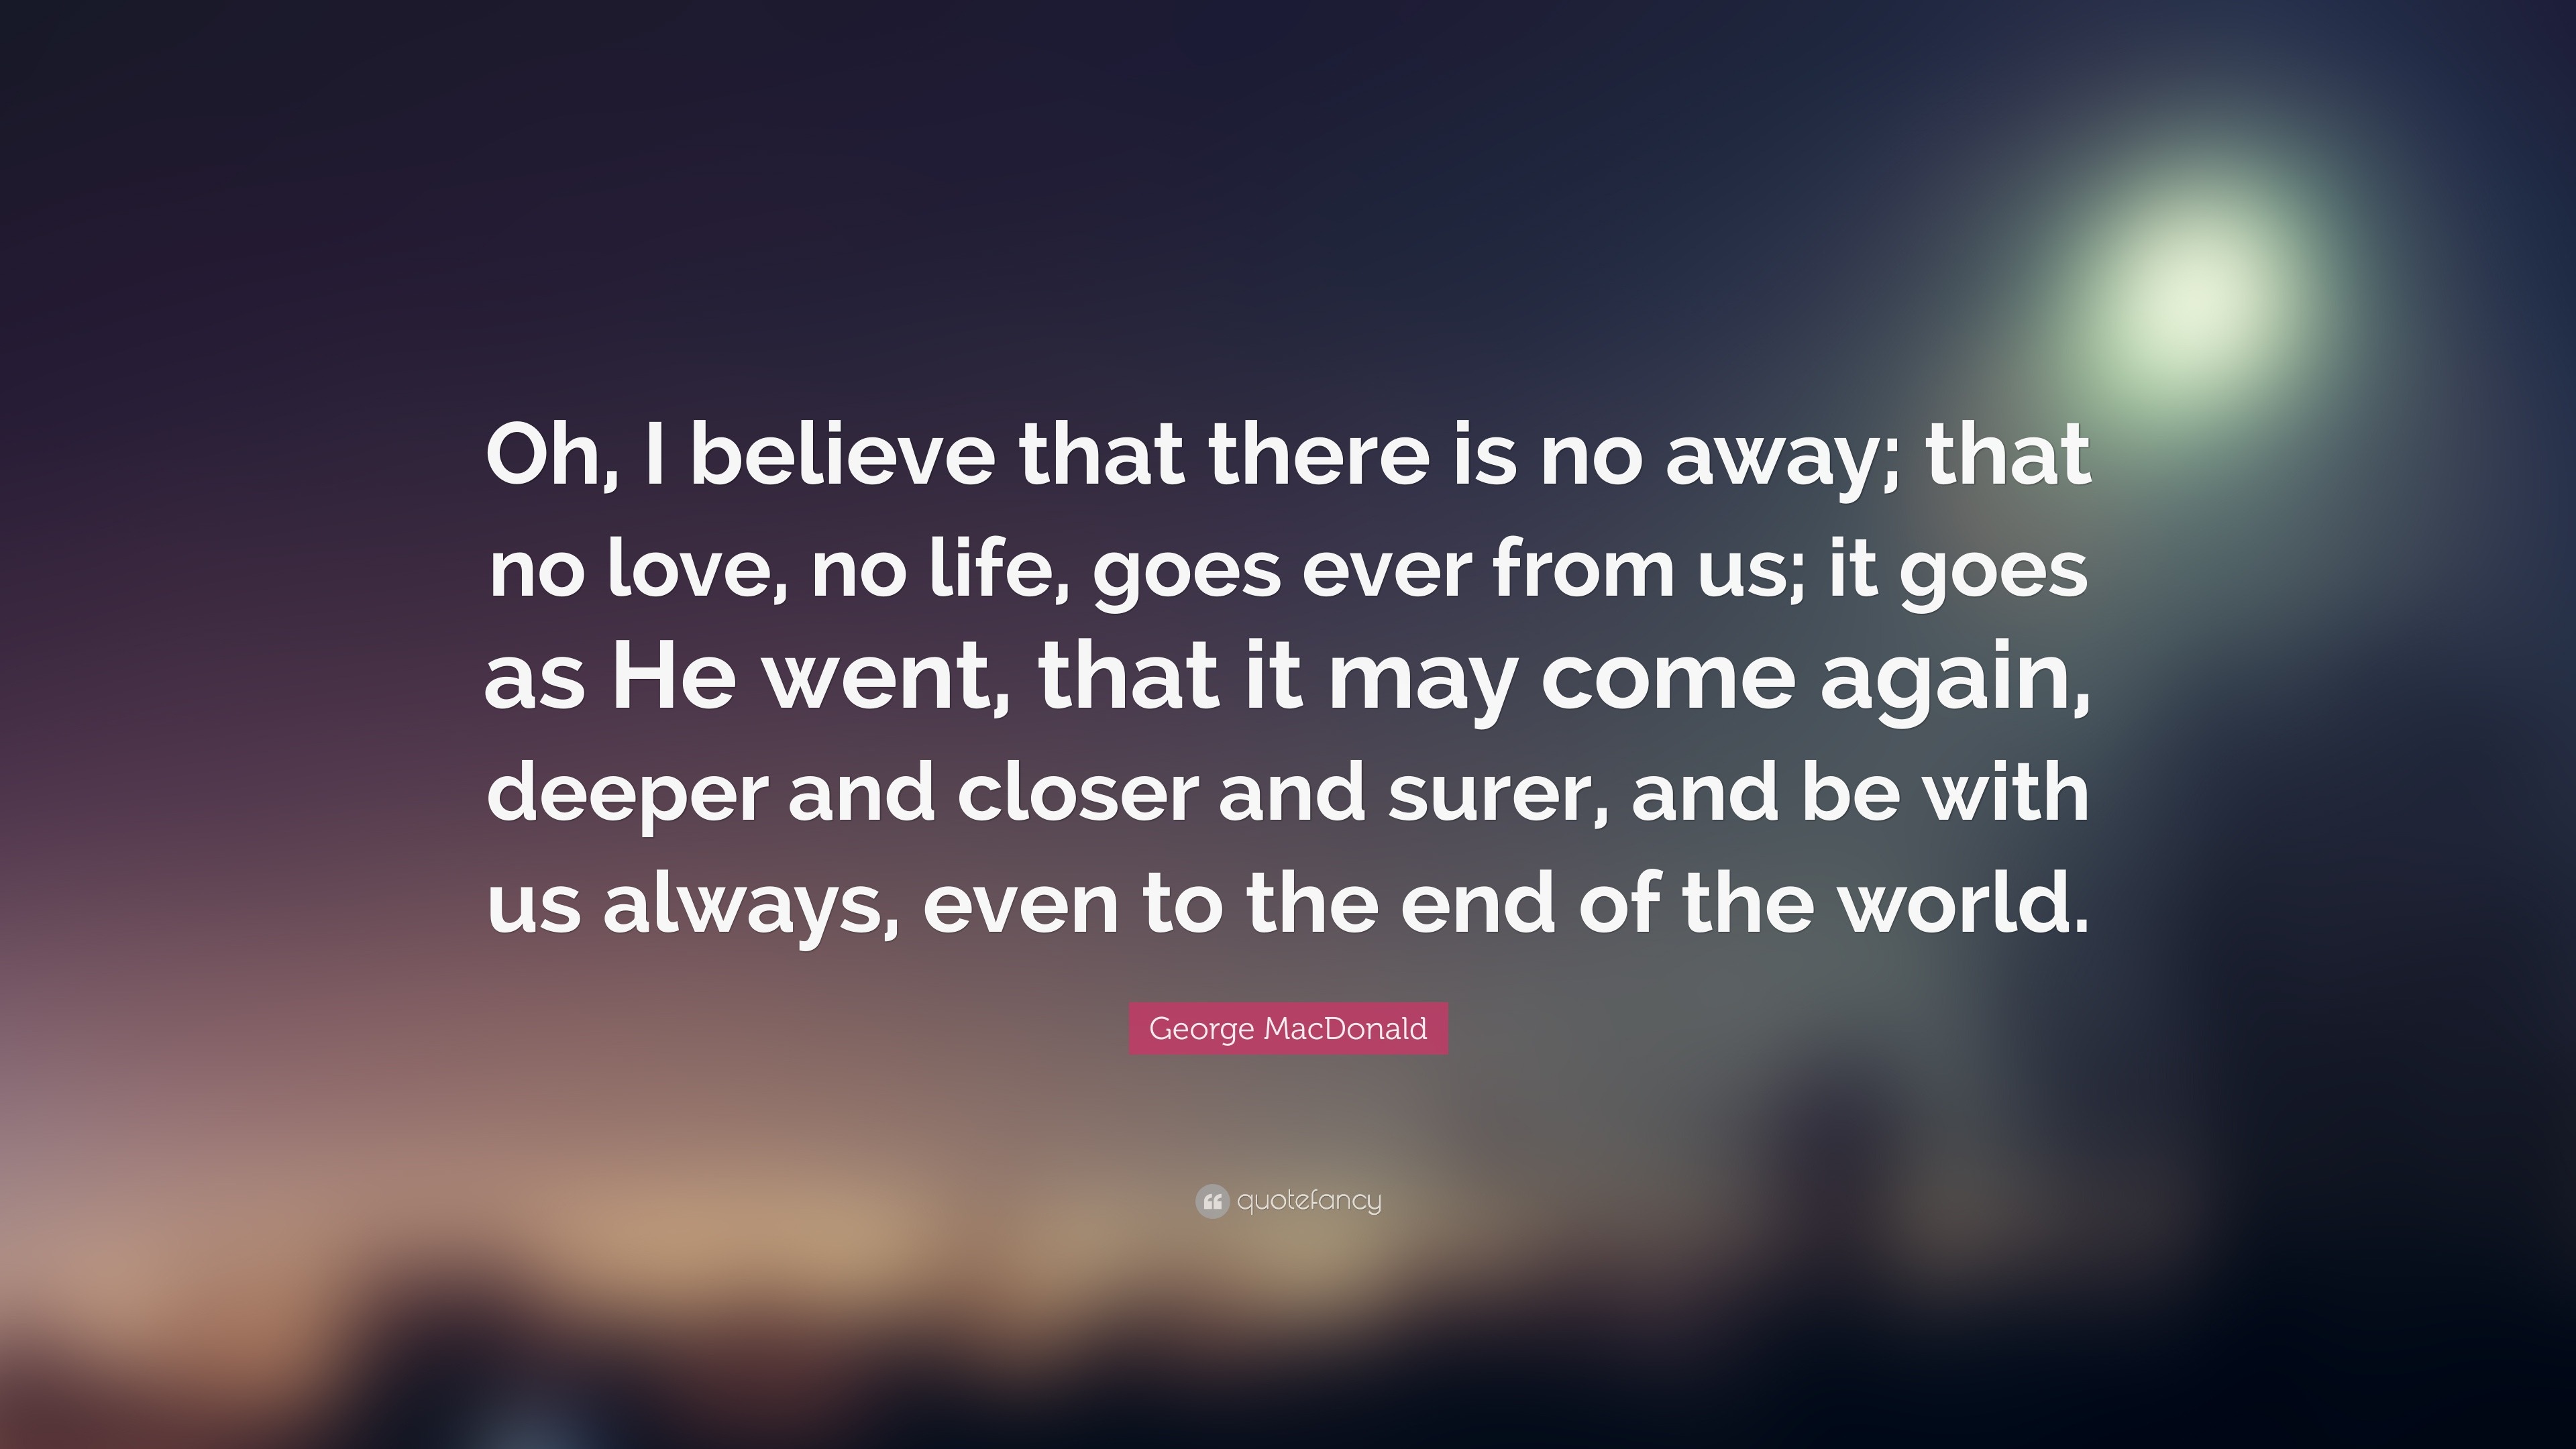 George MacDonald Quote “Oh I believe that there is no away that